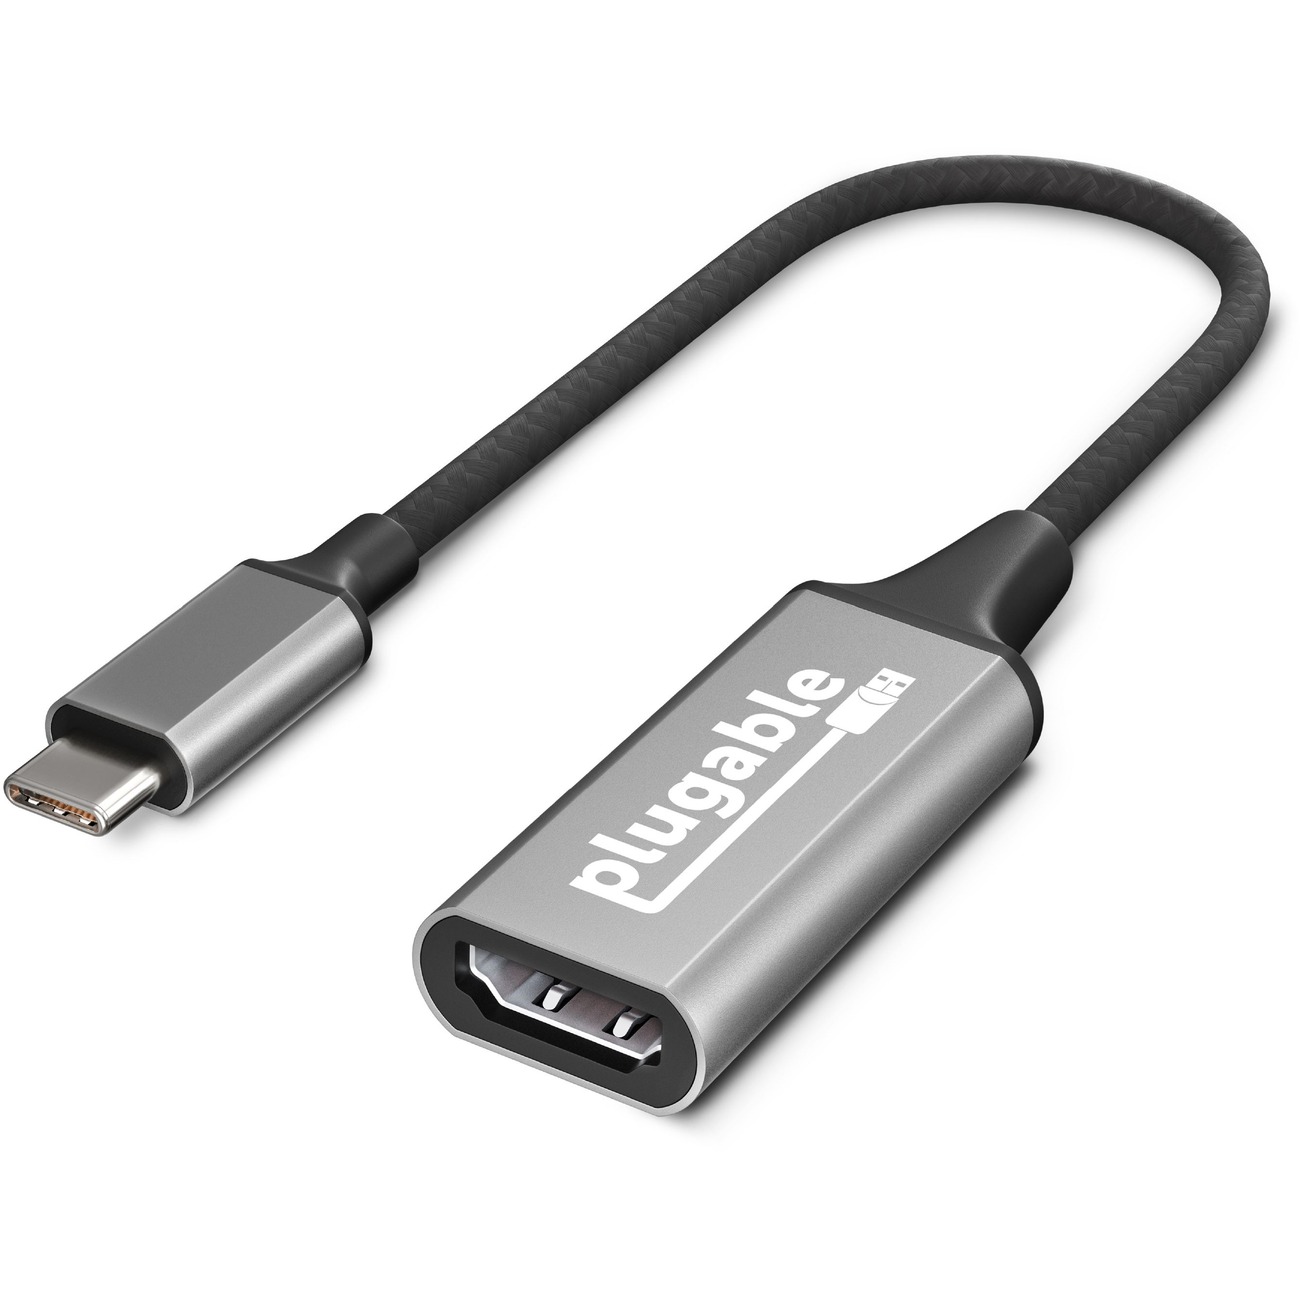 Ambassadeur water huiswerk Plugable USB C to HDMI 2.0 Adapter Compatible with 2018 iPad Pro, 2018  MacBook Air, 2018 MacBook Pro, Dell XPS 13 & 15, Thunderbolt 3 Ports & More  (Supports Resolutions up to 4K@60Hz) - Newegg.com